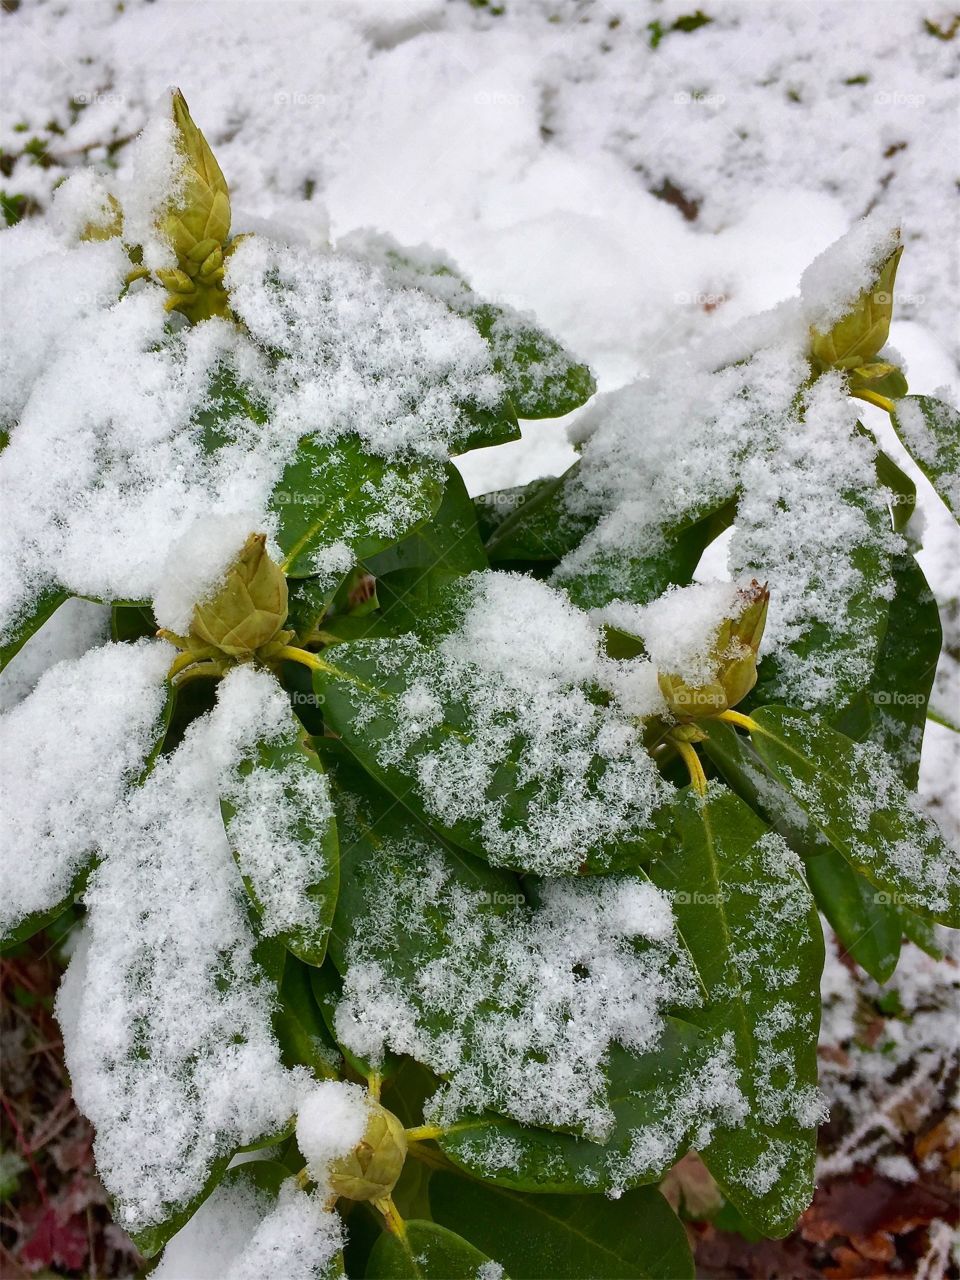 Rhododendron bush that grows in the flowerbed with snow in winter in March in Sweden.